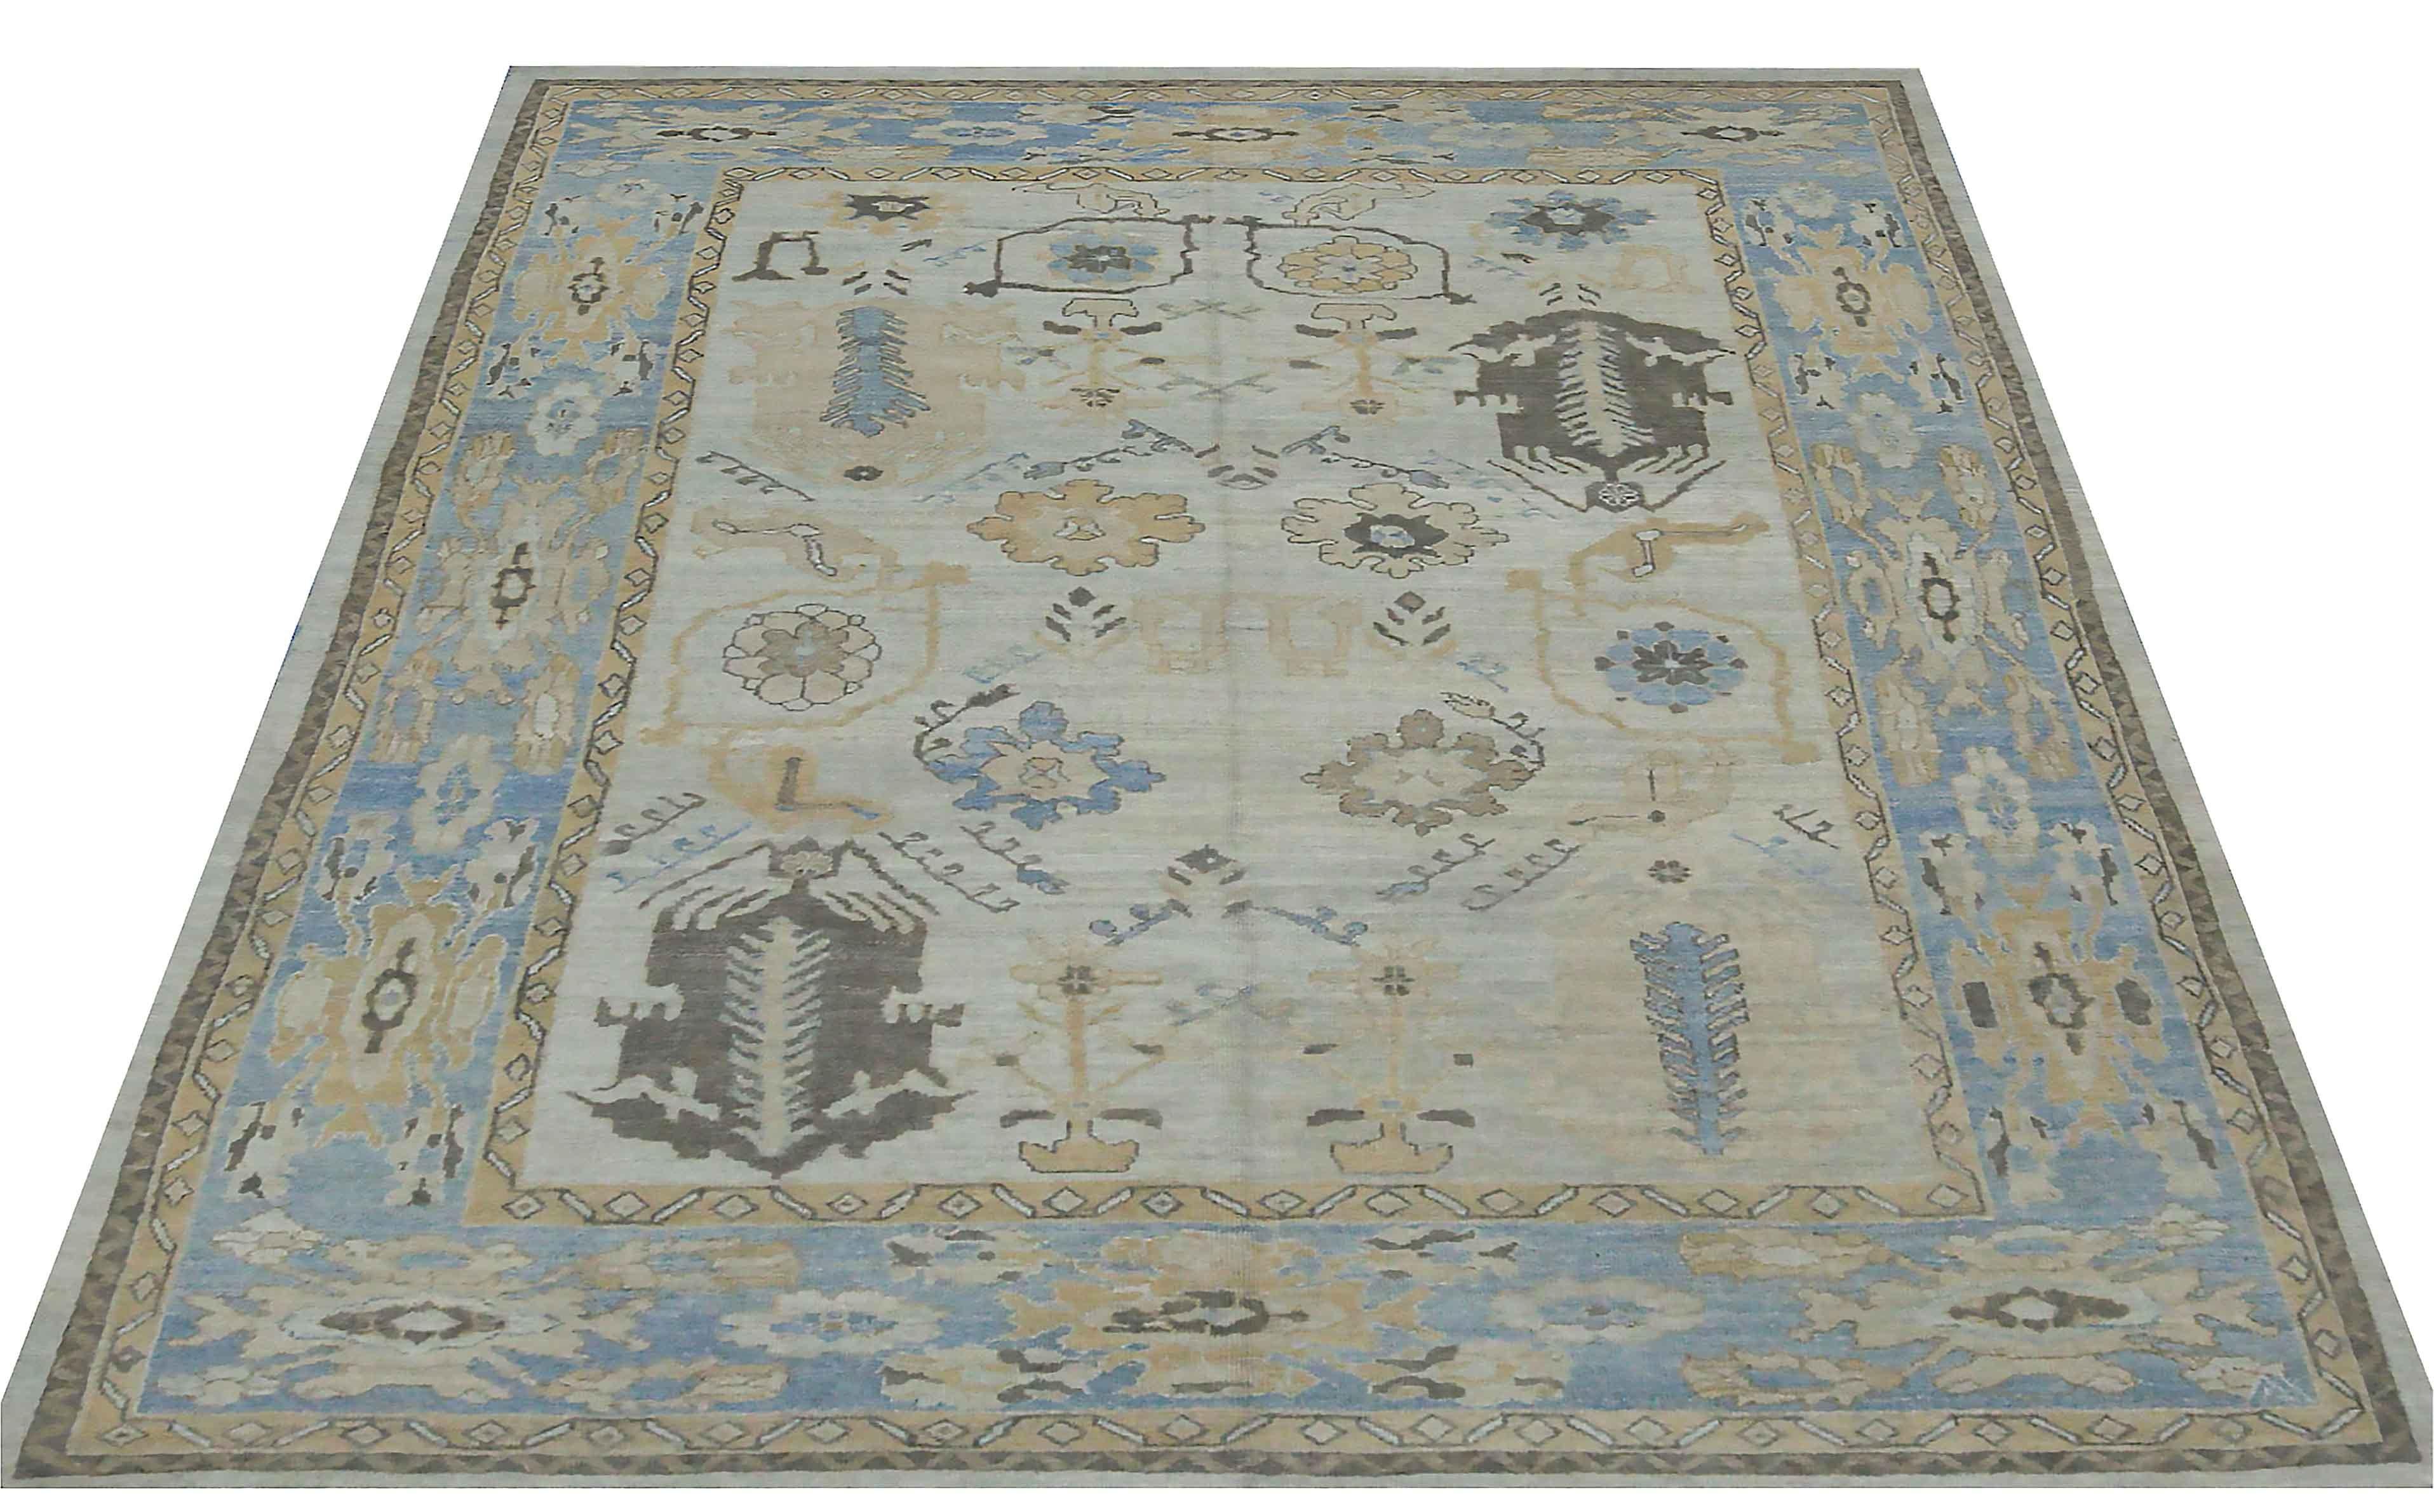 New Turkish rug made of handwoven sheep’s wool of the finest quality. It’s colored with organic vegetable dyes that are certified safe for humans and pets alike. It features gray and beige floral details on a cool blue field. Flower patterns are